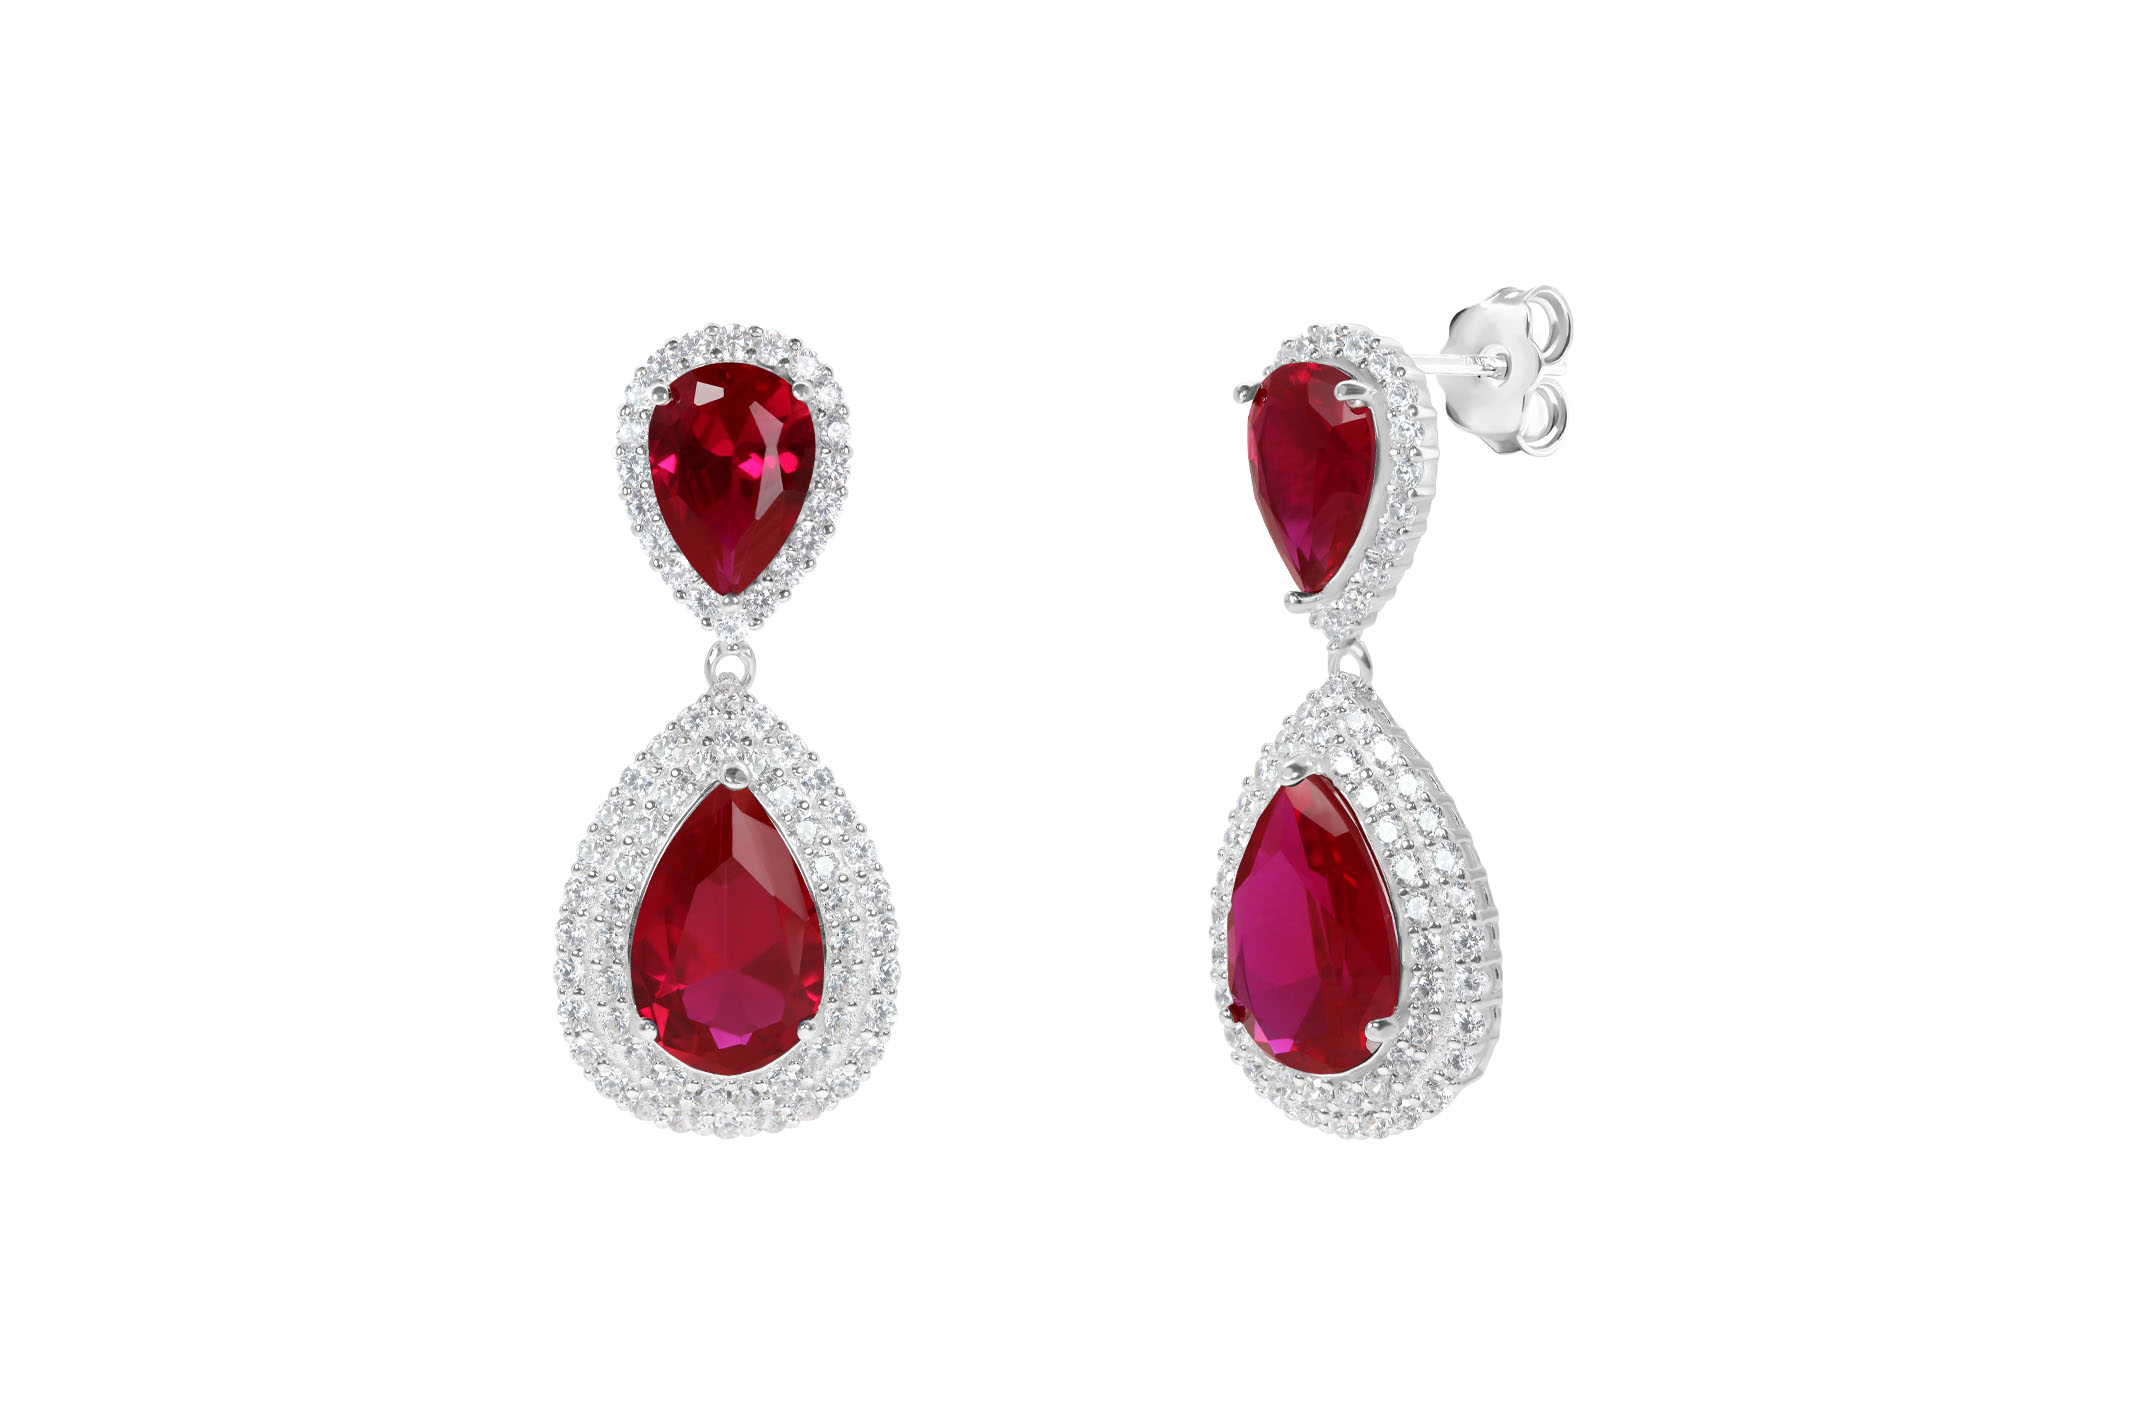 Jewel: earrings;Material: silver 925;Weight: 7.5 gr;Stone: zirconias and hydrothermal;Color: white;Size: 3 cm;Gender: woman